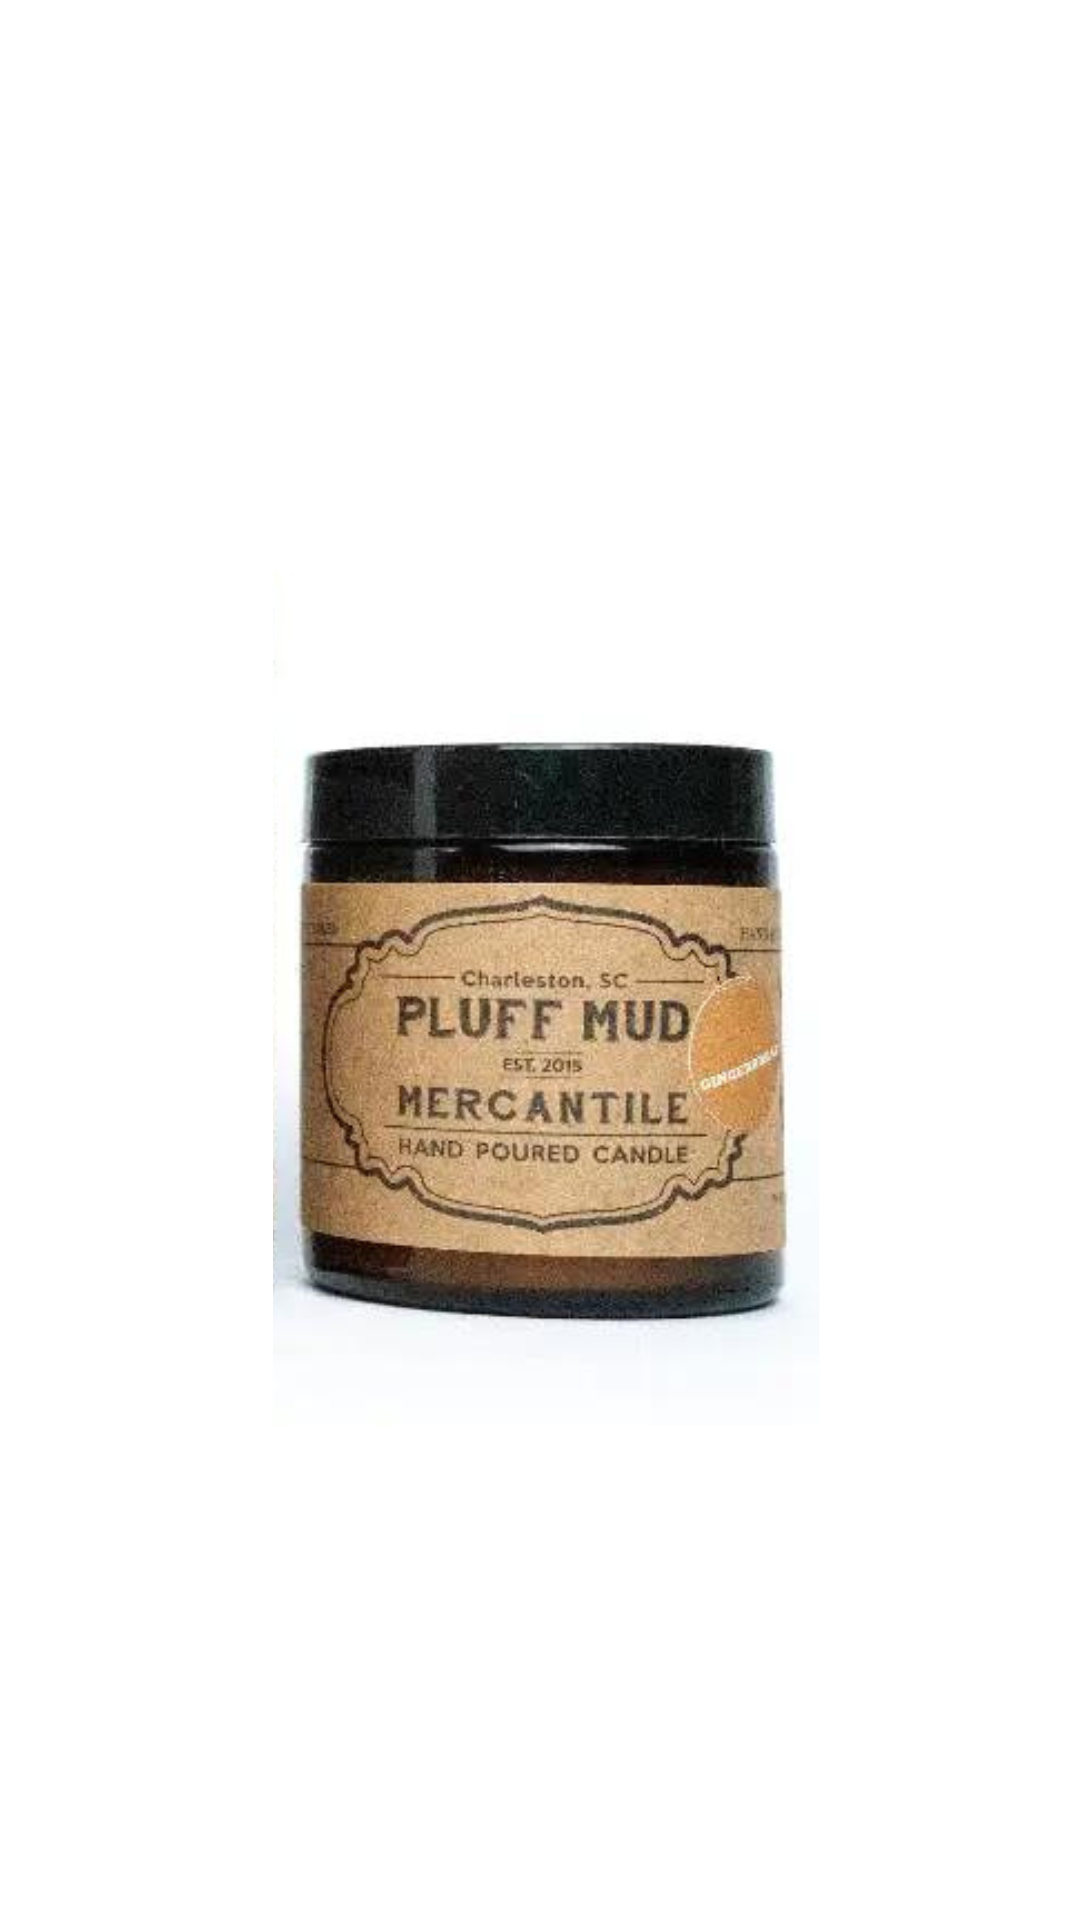 Jus' Jasmine Hand Poured Soy Candle - Pluff Mud Mercantile